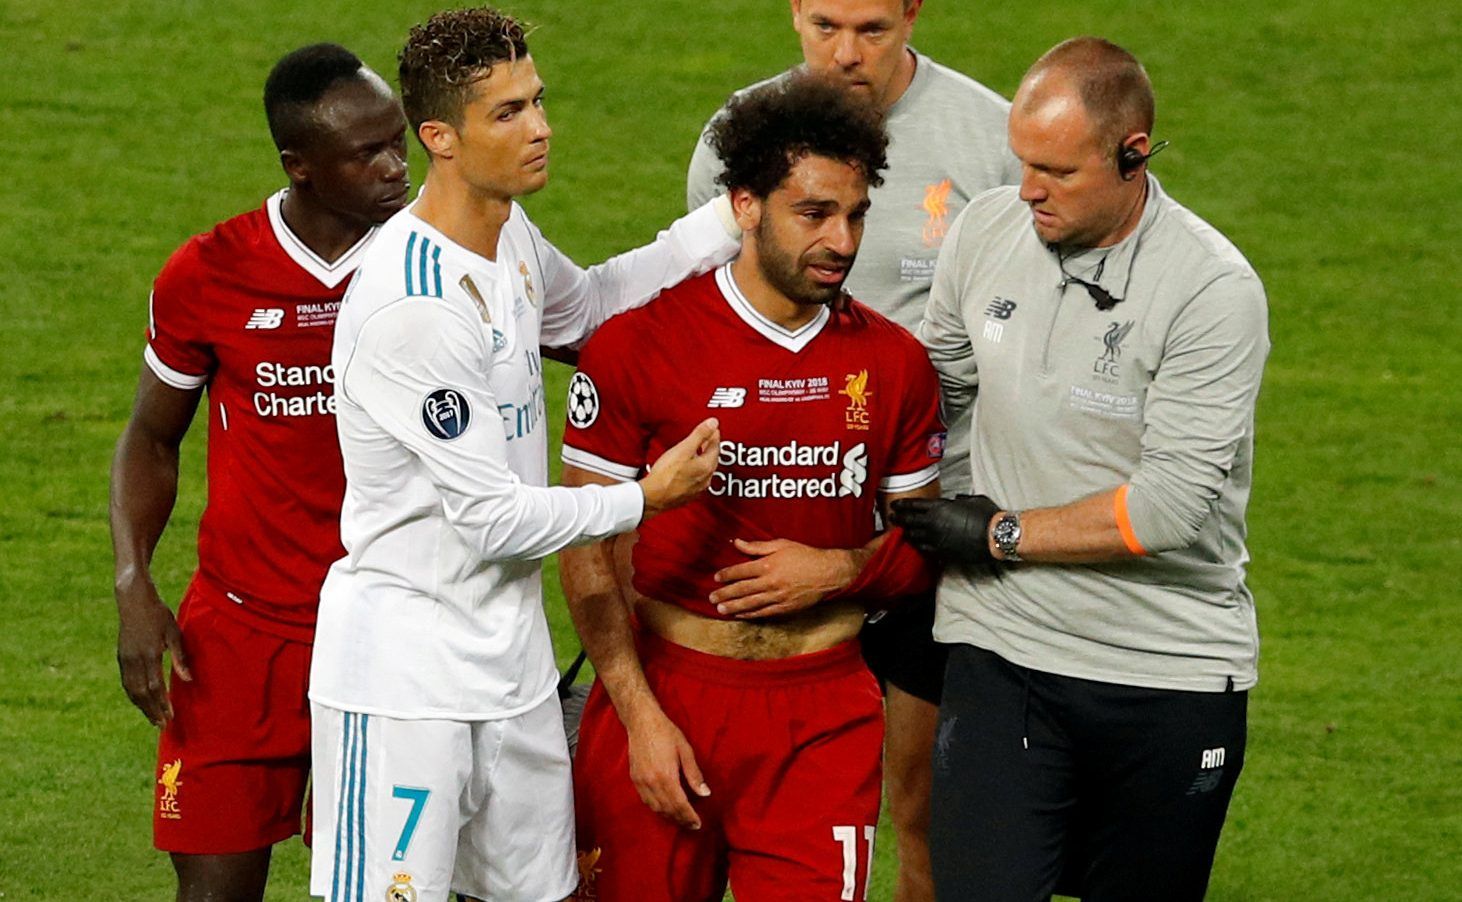 Soccer Football - Champions League Final - Real Madrid v Liverpool - NSC Olympic Stadium, Kiev, Ukraine - May 26, 2018   Liverpool's Mohamed Salah with Sadio Mane and Real Madrid's Cristiano Ronaldo as he is substituted after sustaining an injury   REUTERS/Phil Noble     TPX IMAGES OF THE DAY